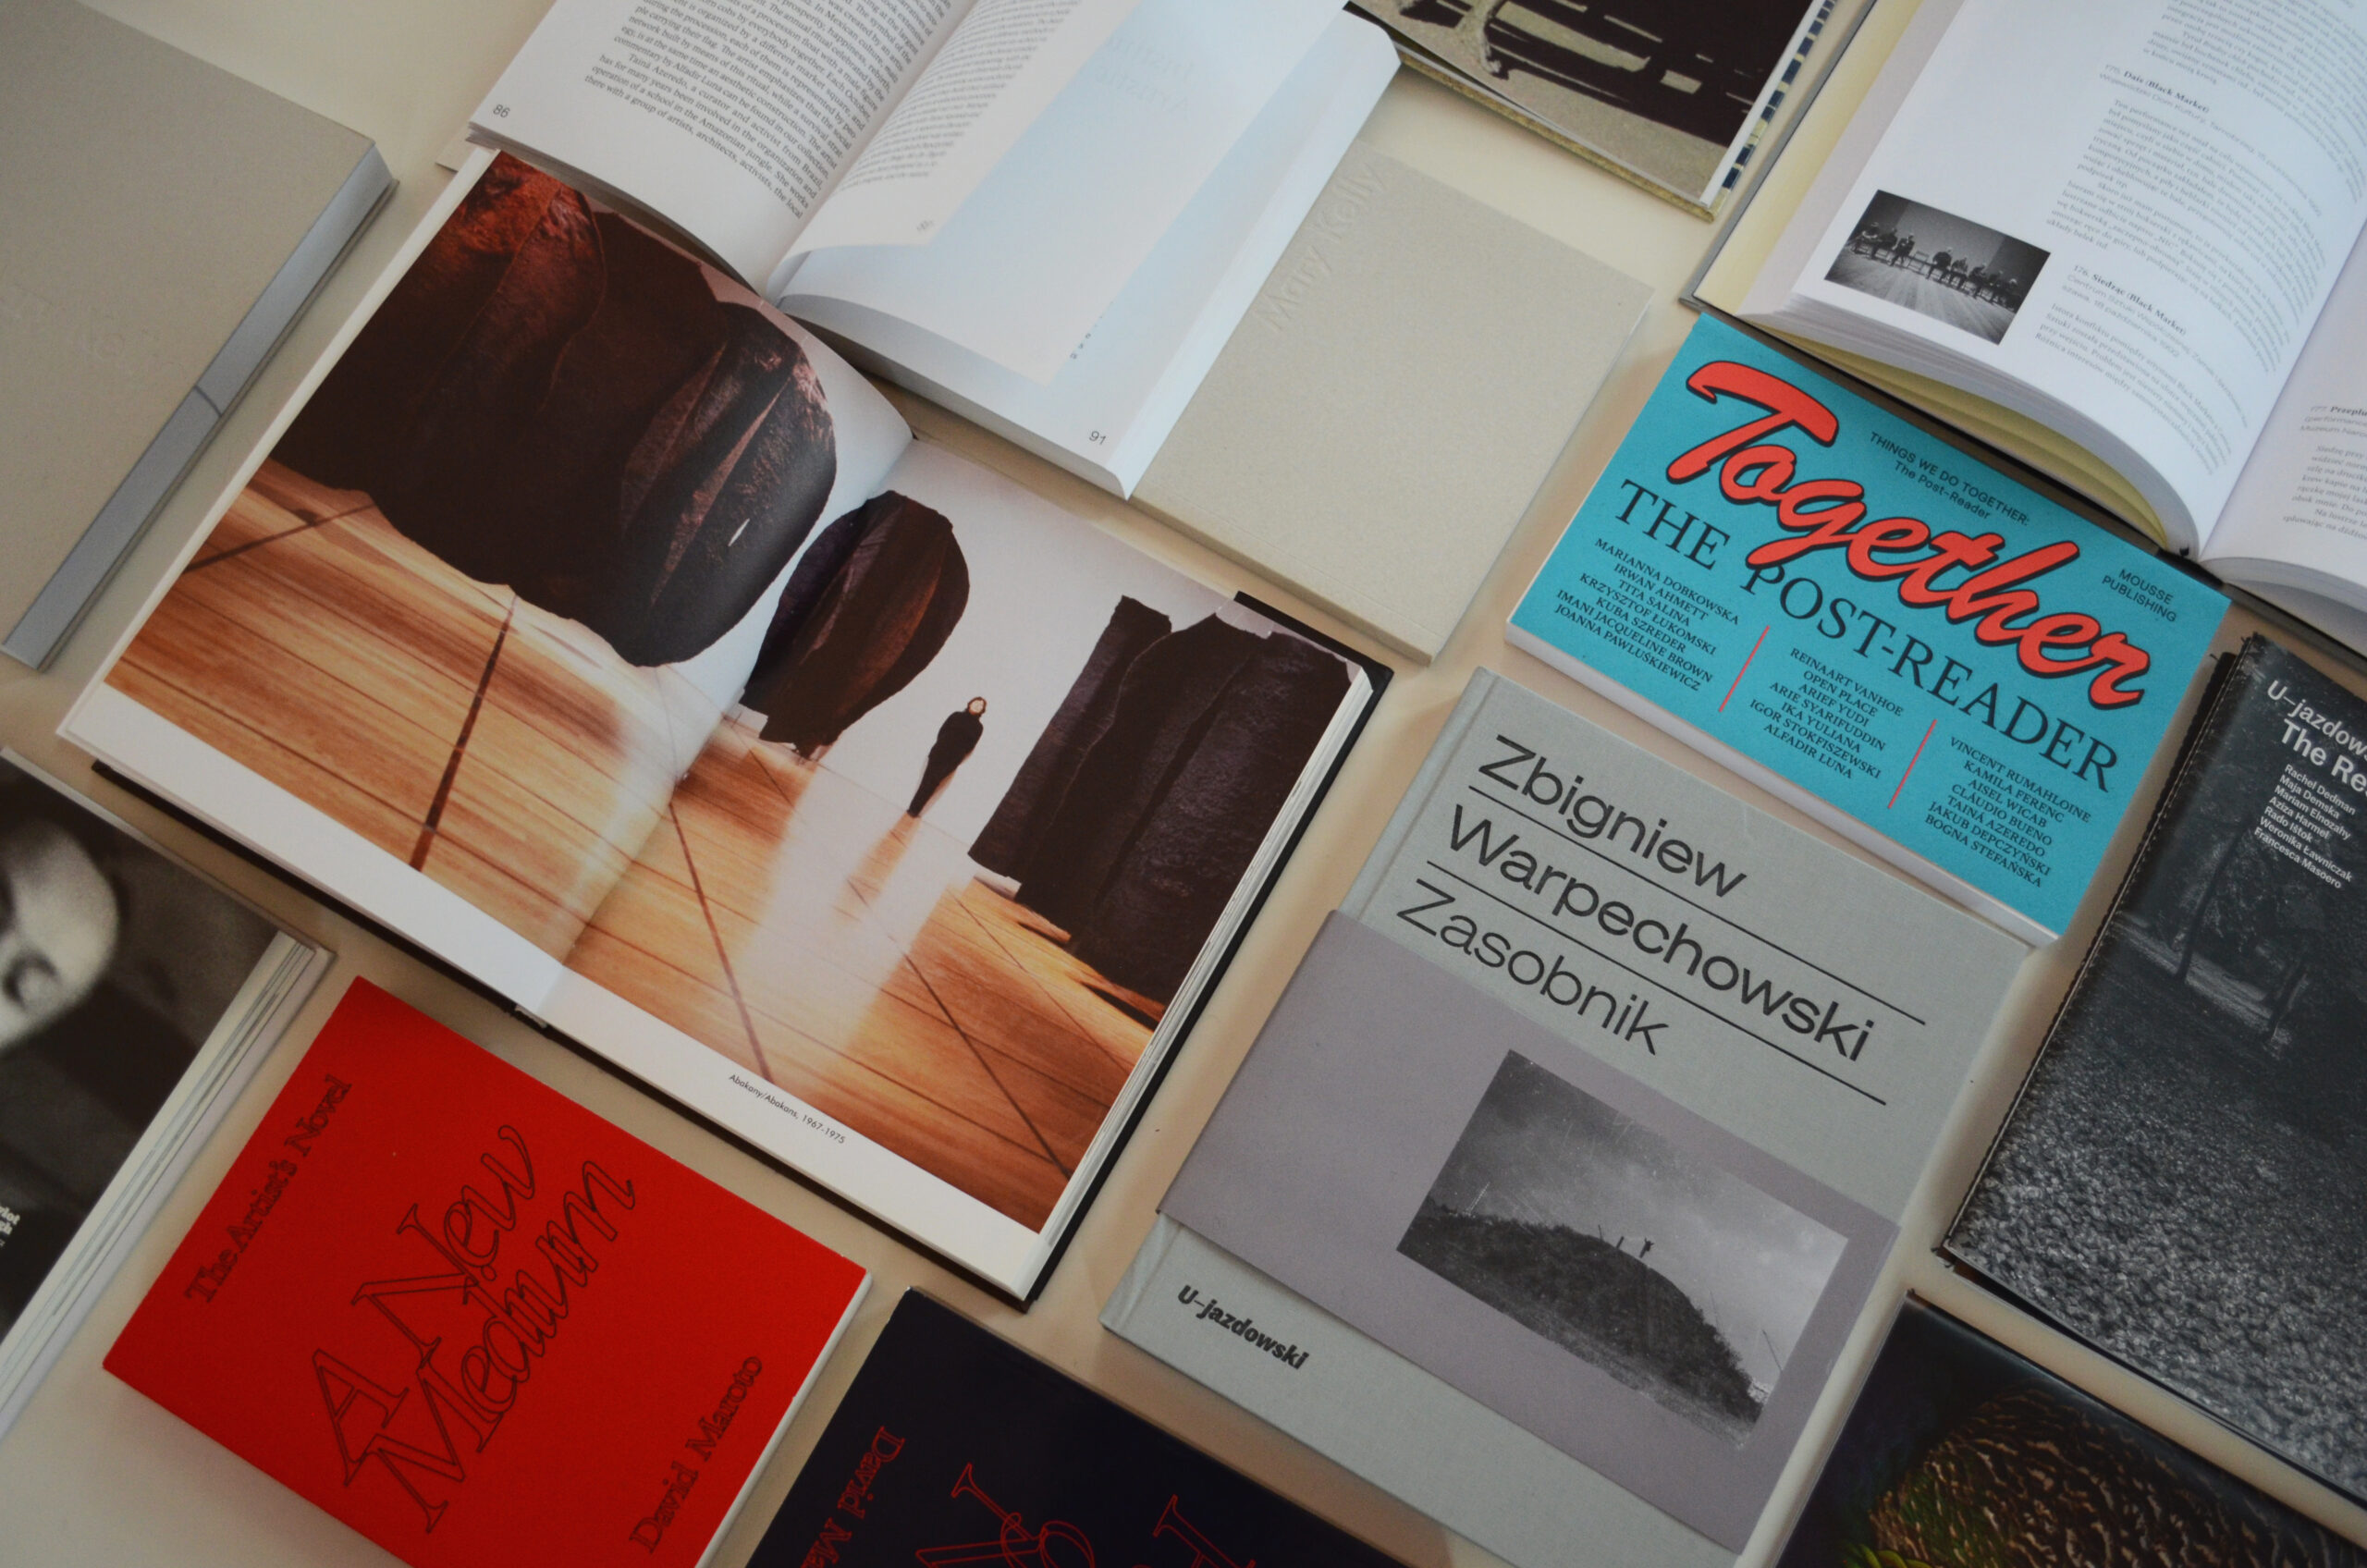 Books about artists and art published by the Ujazdowski Castle Centre for Contemporary Art